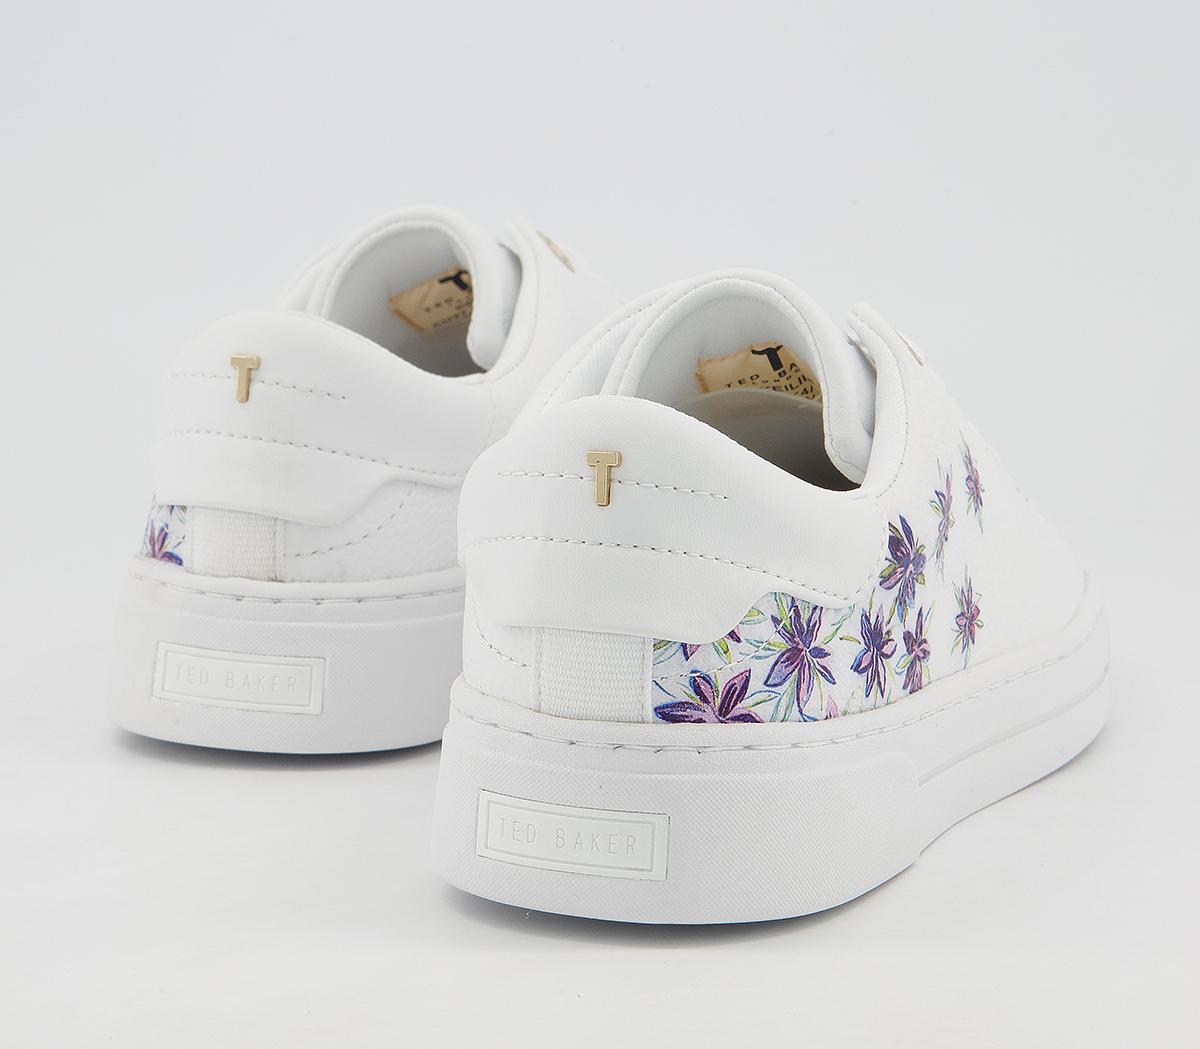 Ted Baker Keylie Trainers White Floral - Flat Shoes for Women